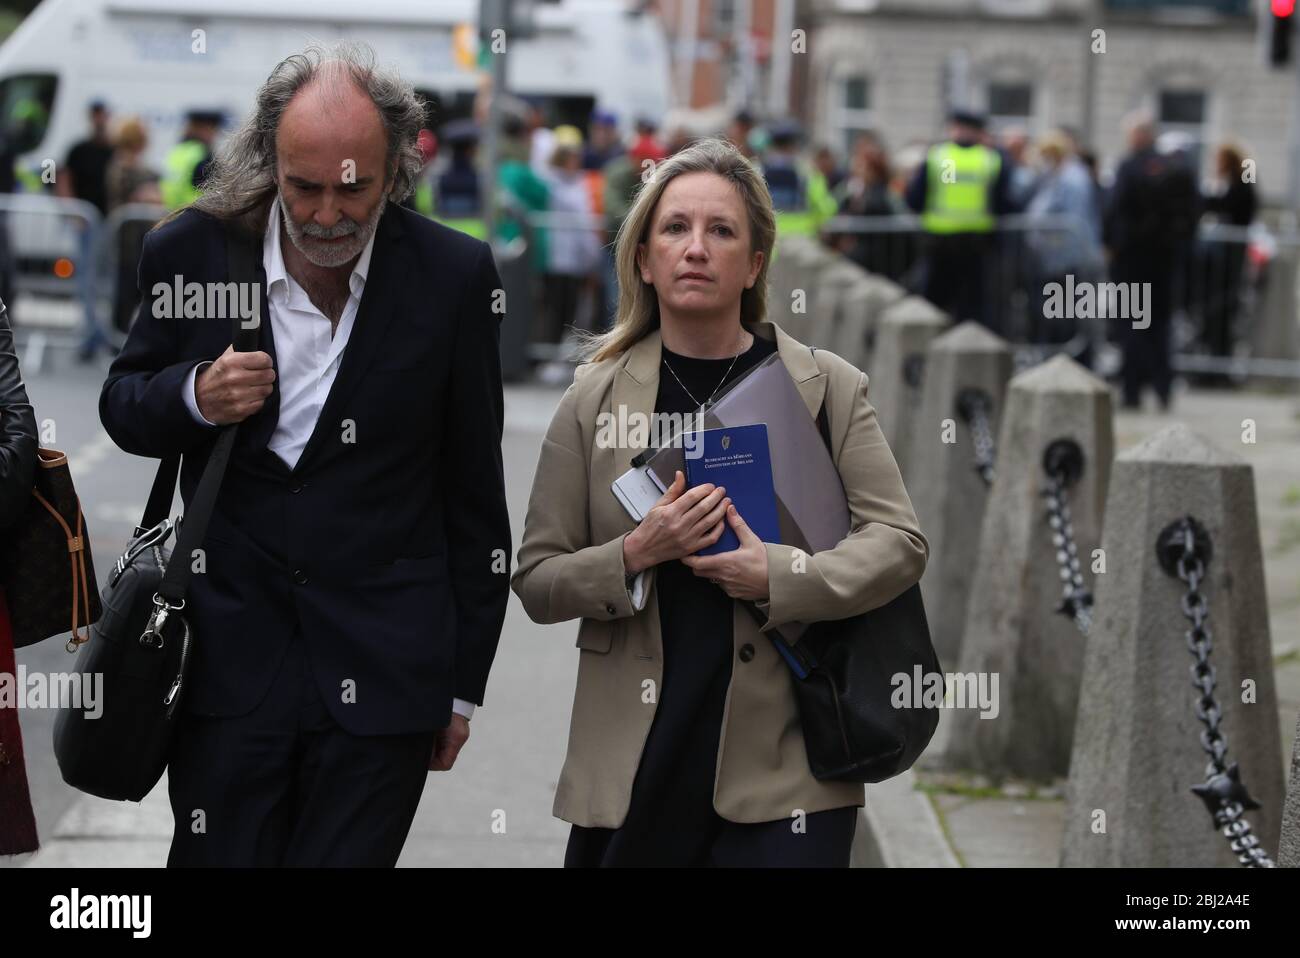 John Waters and Gemma O'Doherty, arrive at the High Court in Dublin, where they have launched a legal challenge against the State over emergency laws and restrictions introduced to stop the spread of Covid-19. Stock Photo